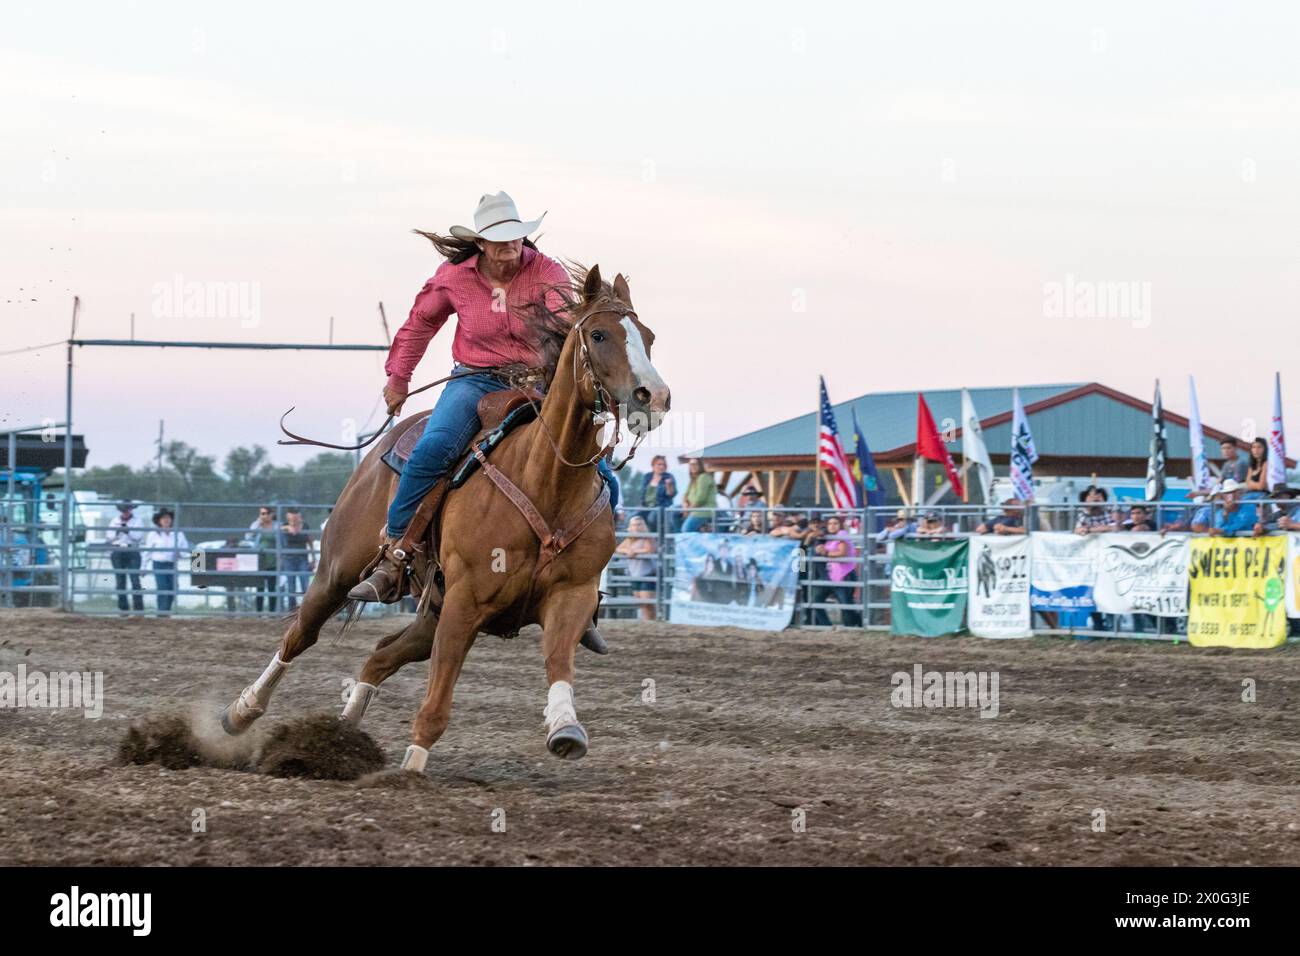 Cowgirl racing horse at county fair rodeo Stock Photo